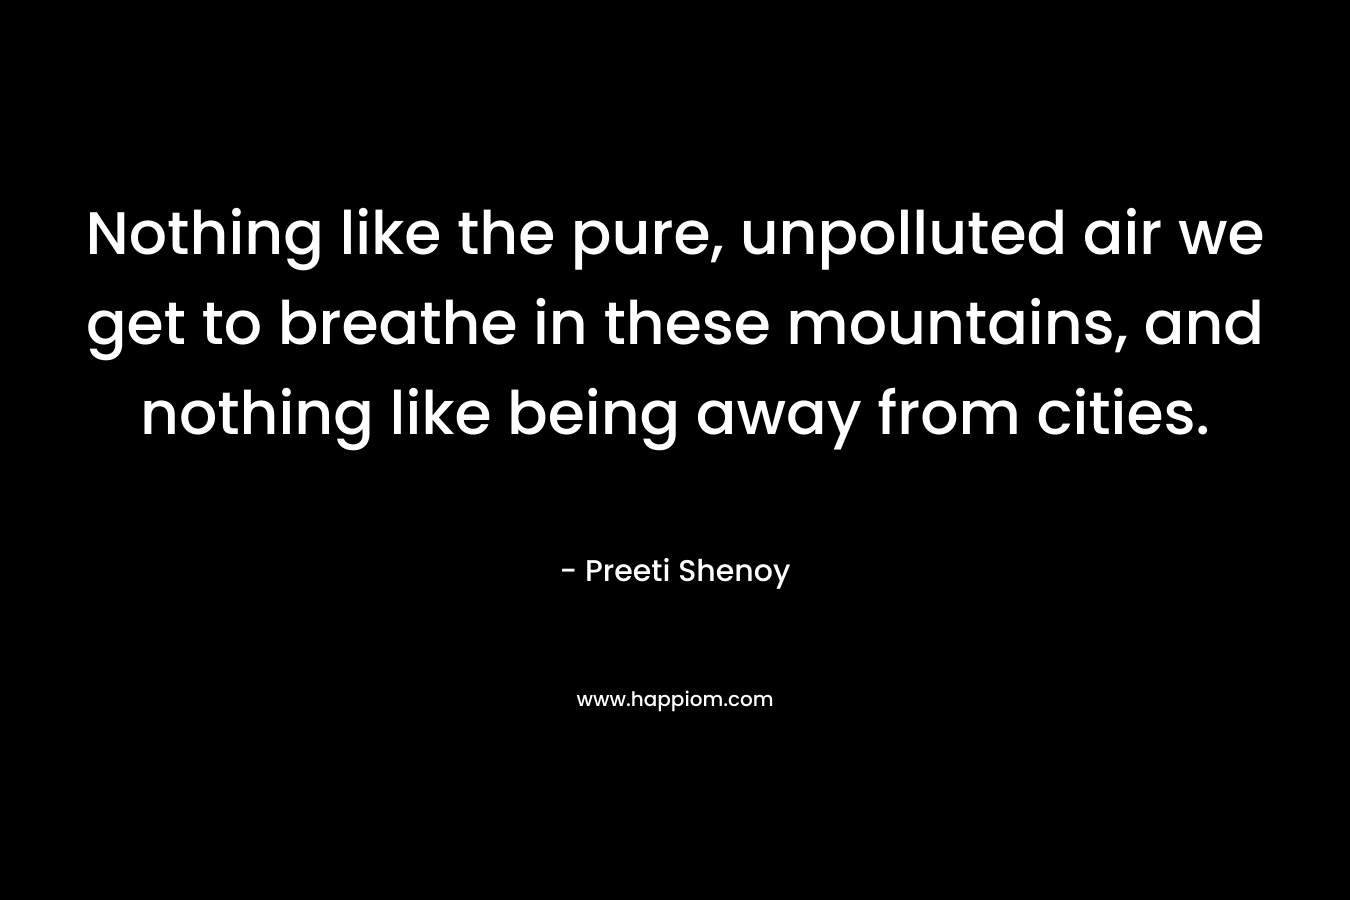 Nothing like the pure, unpolluted air we get to breathe in these mountains, and nothing like being away from cities. – Preeti Shenoy